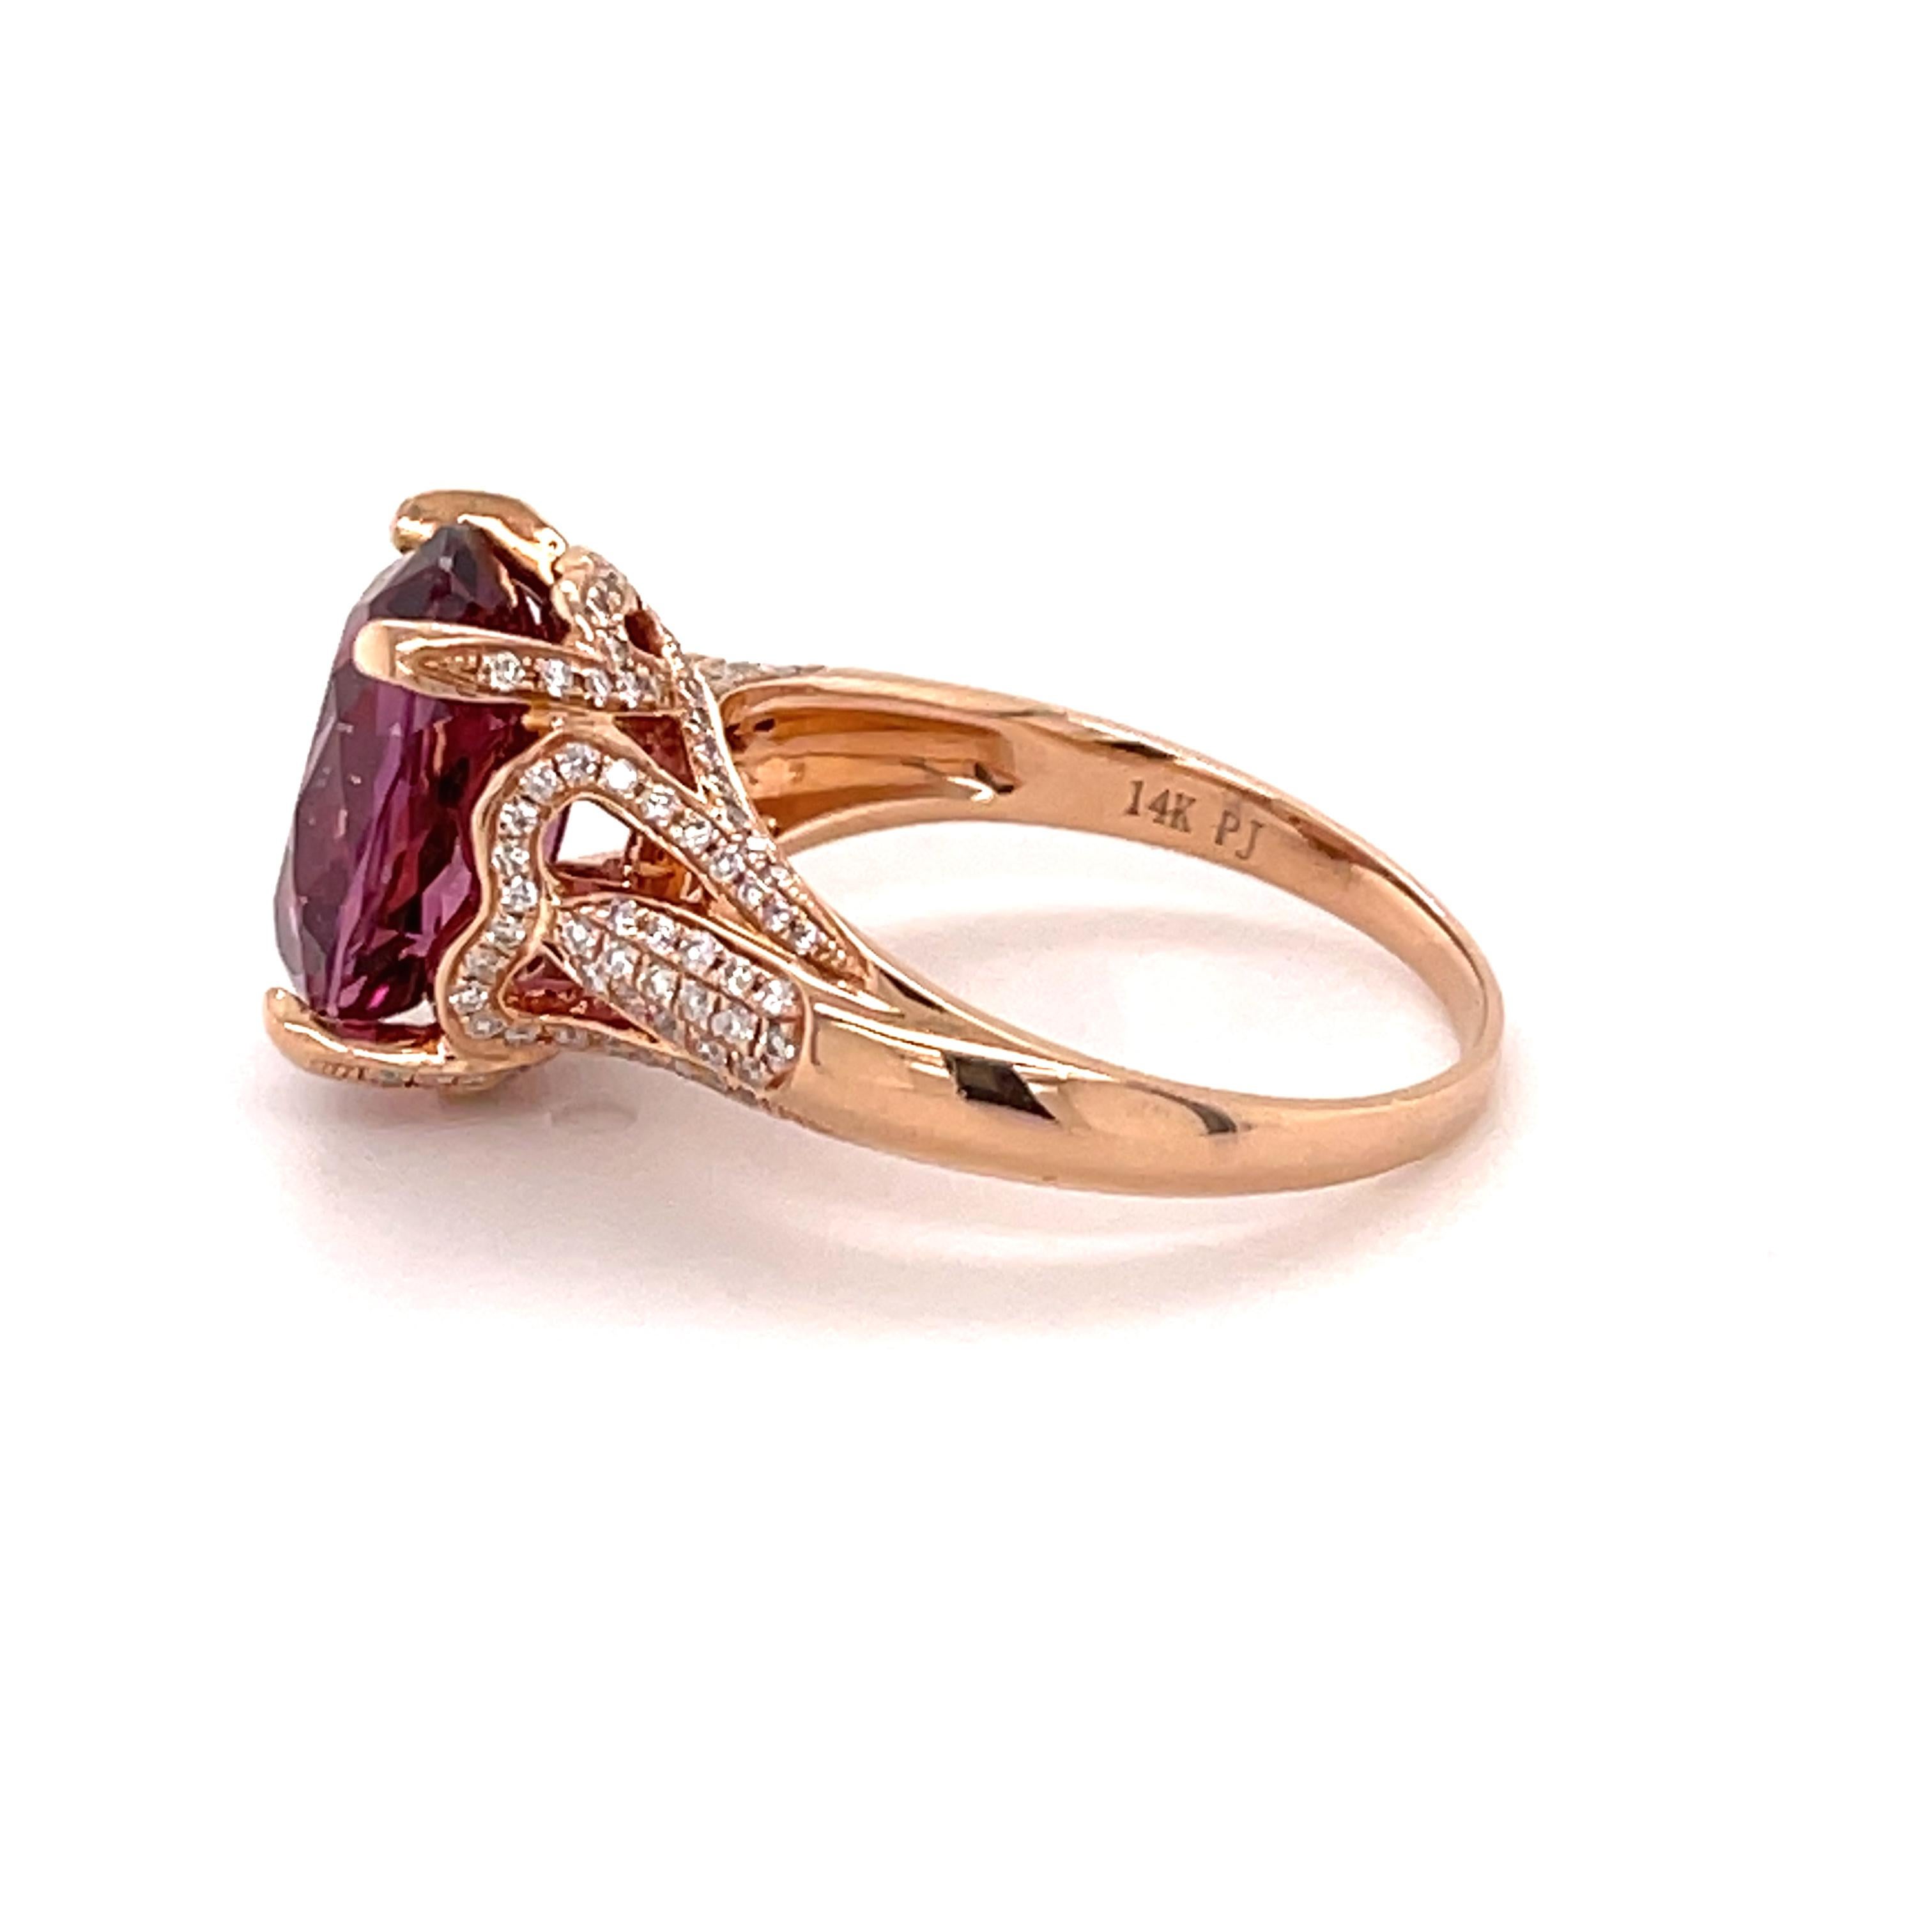 This dazzling Mahenge Malaya Garnet is set in an almost simple 14-karat rose-gold ring. If you like hearts, you have to look at the ring from the side to see the heart shape in the stone-basket.
Mahenge Malaya Garnet is a recently found gemstone and